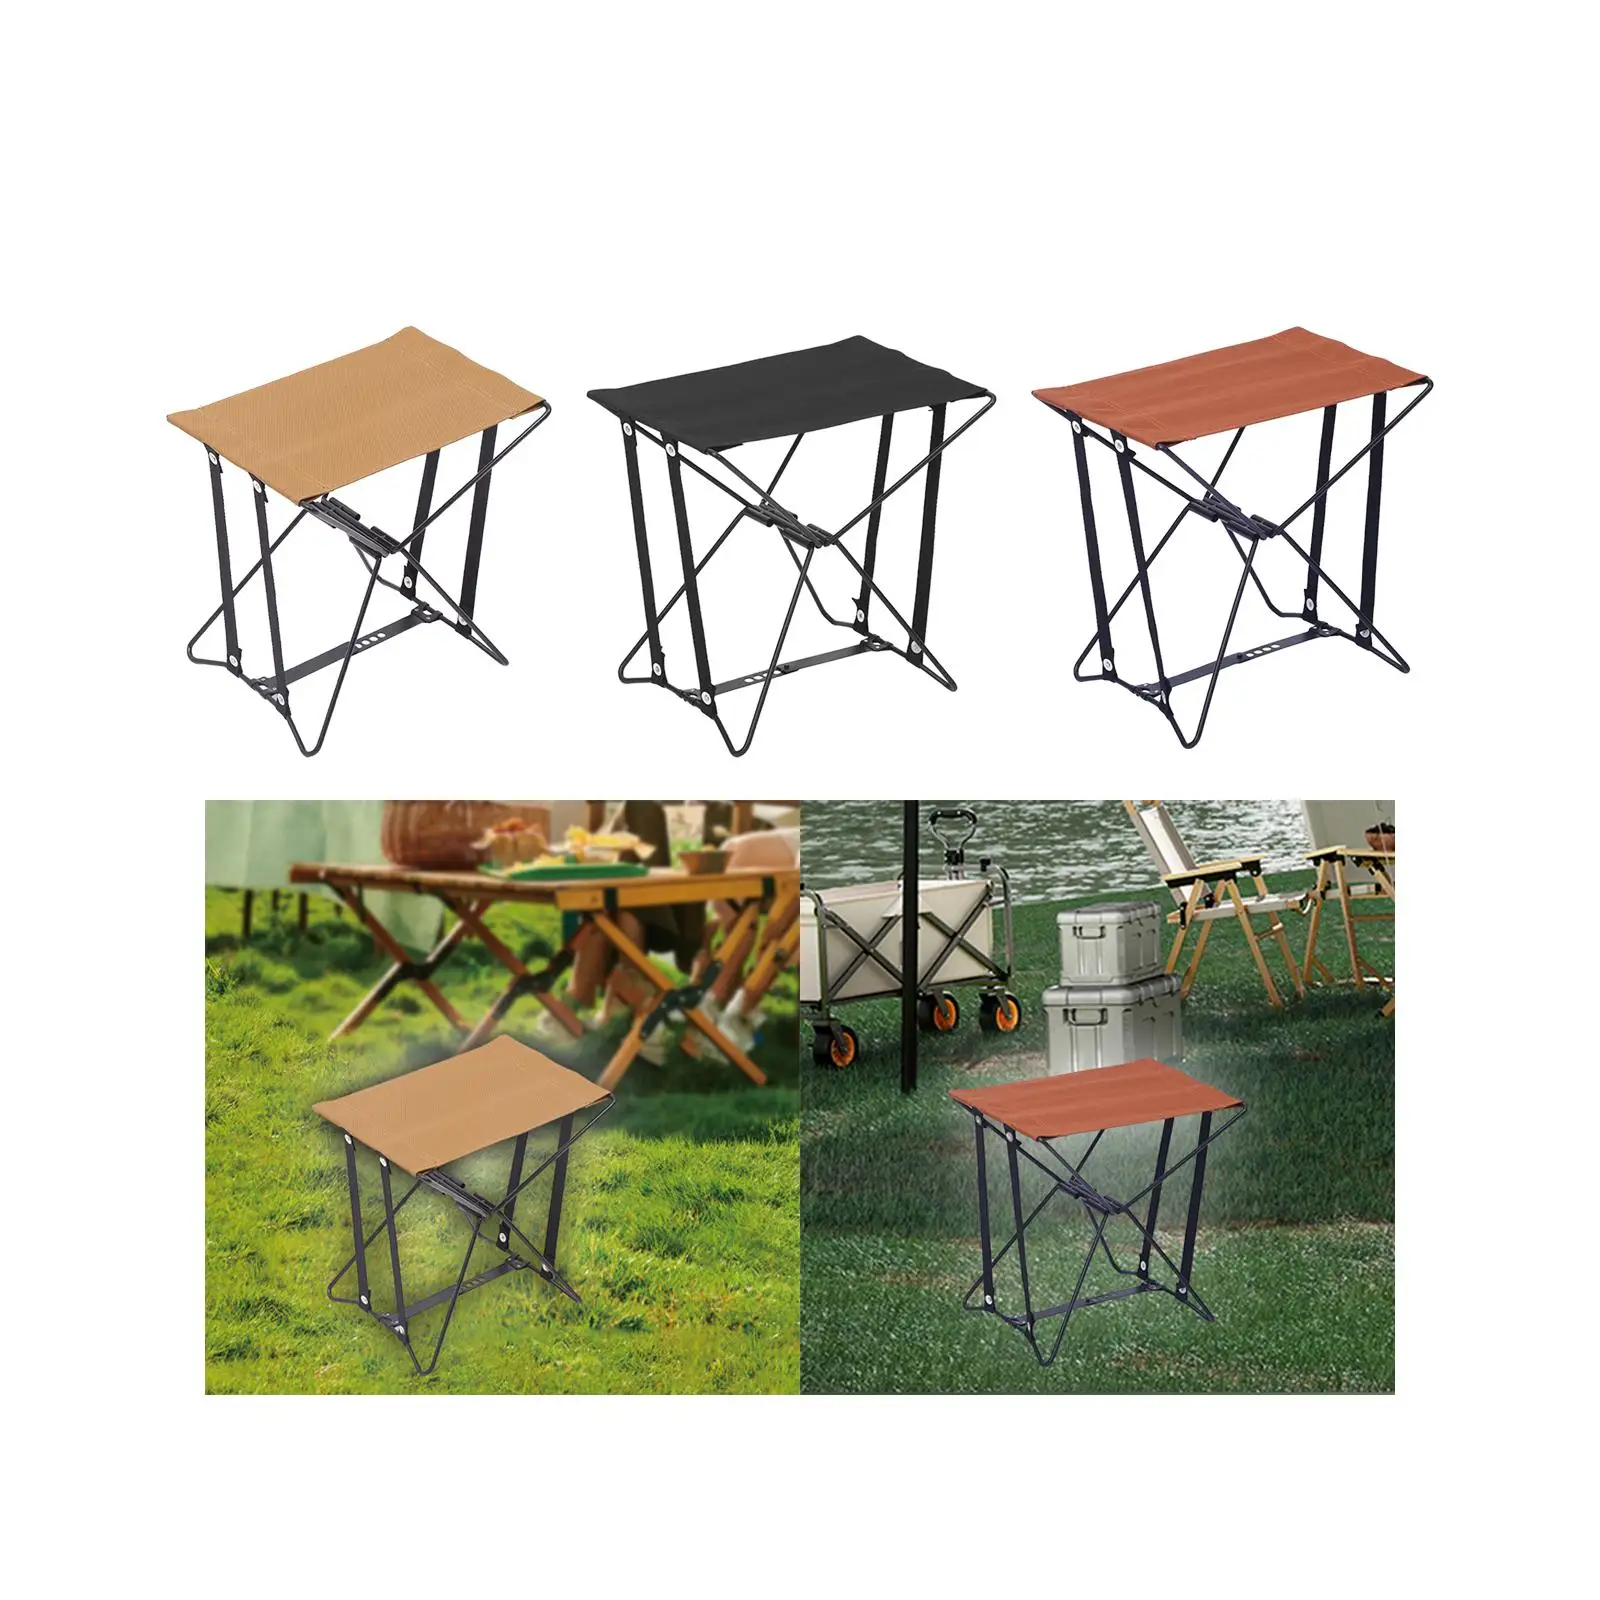 Camping Stool Footrest with Carry Bag Portable Folding Stool Foldable Footstool for Barbecue Traveling Sports Hiking Concert